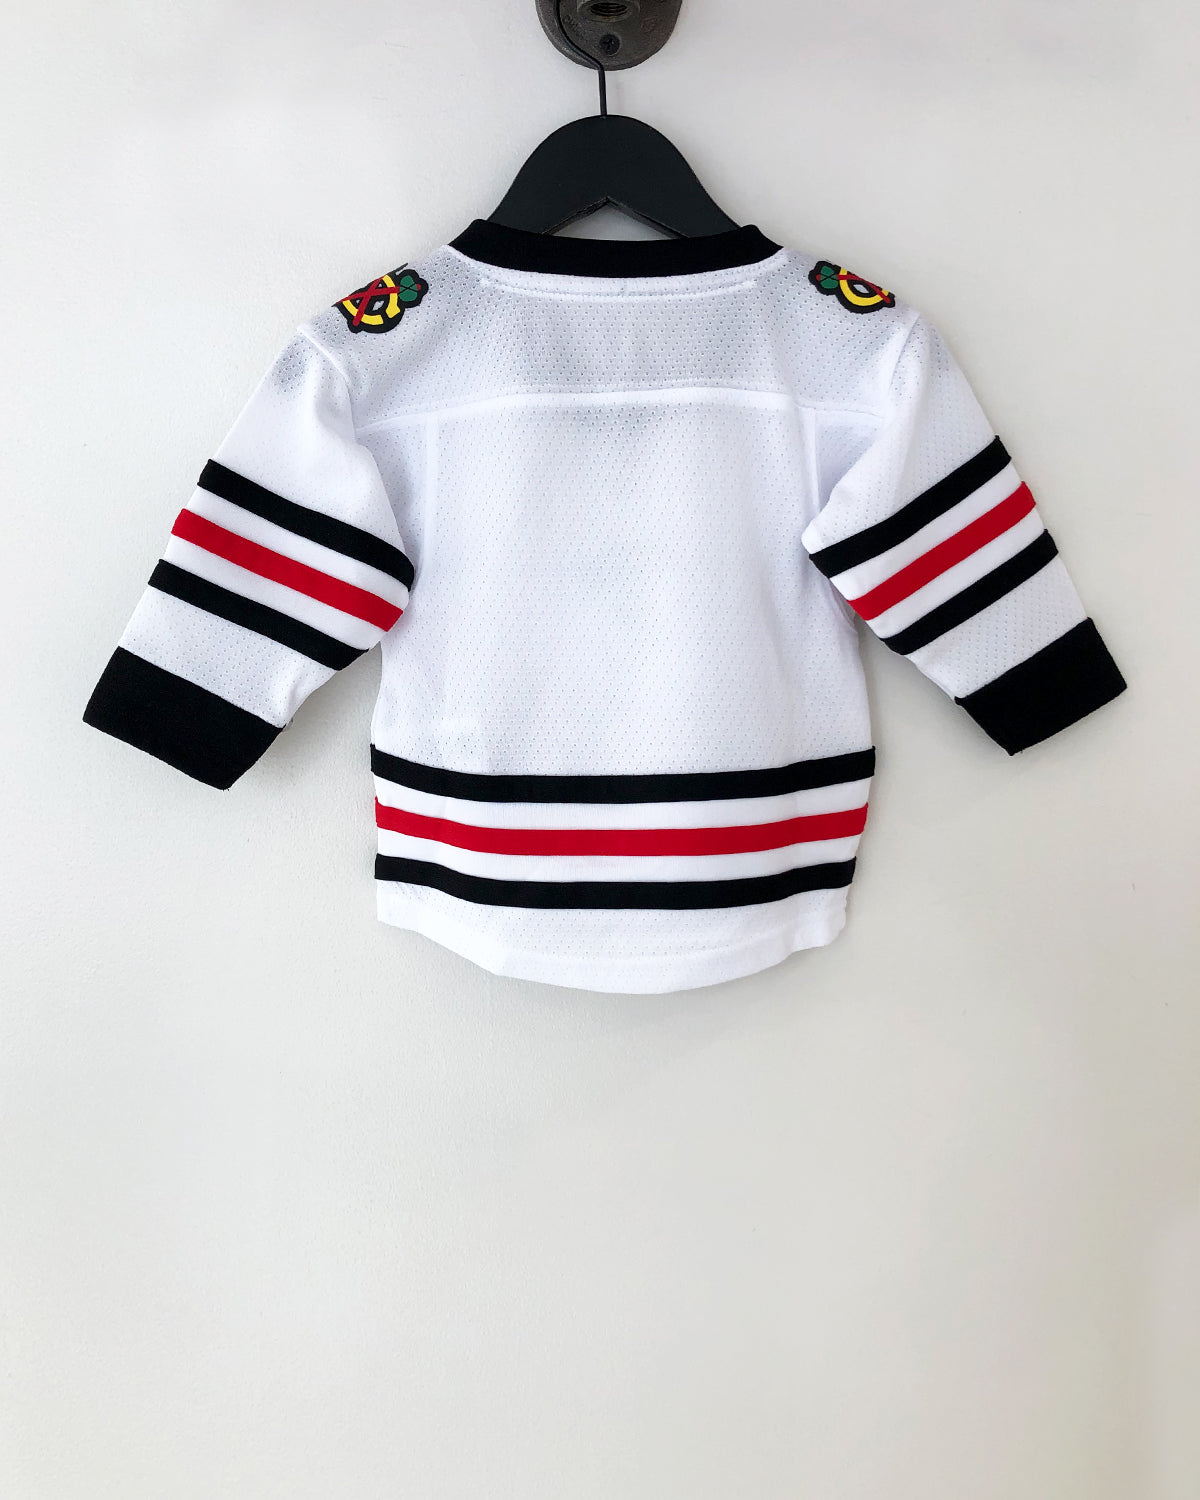 Blackhawks Store on X: ICYMI: Blackhawks #WinterClassic practice jerseys  are available now at the #BlackhawksStore, @MadhouseStoreUC and  #HockeyHouse! The practice jerseys are blank ($130) and it's an additional  $60 for lettering. Stop